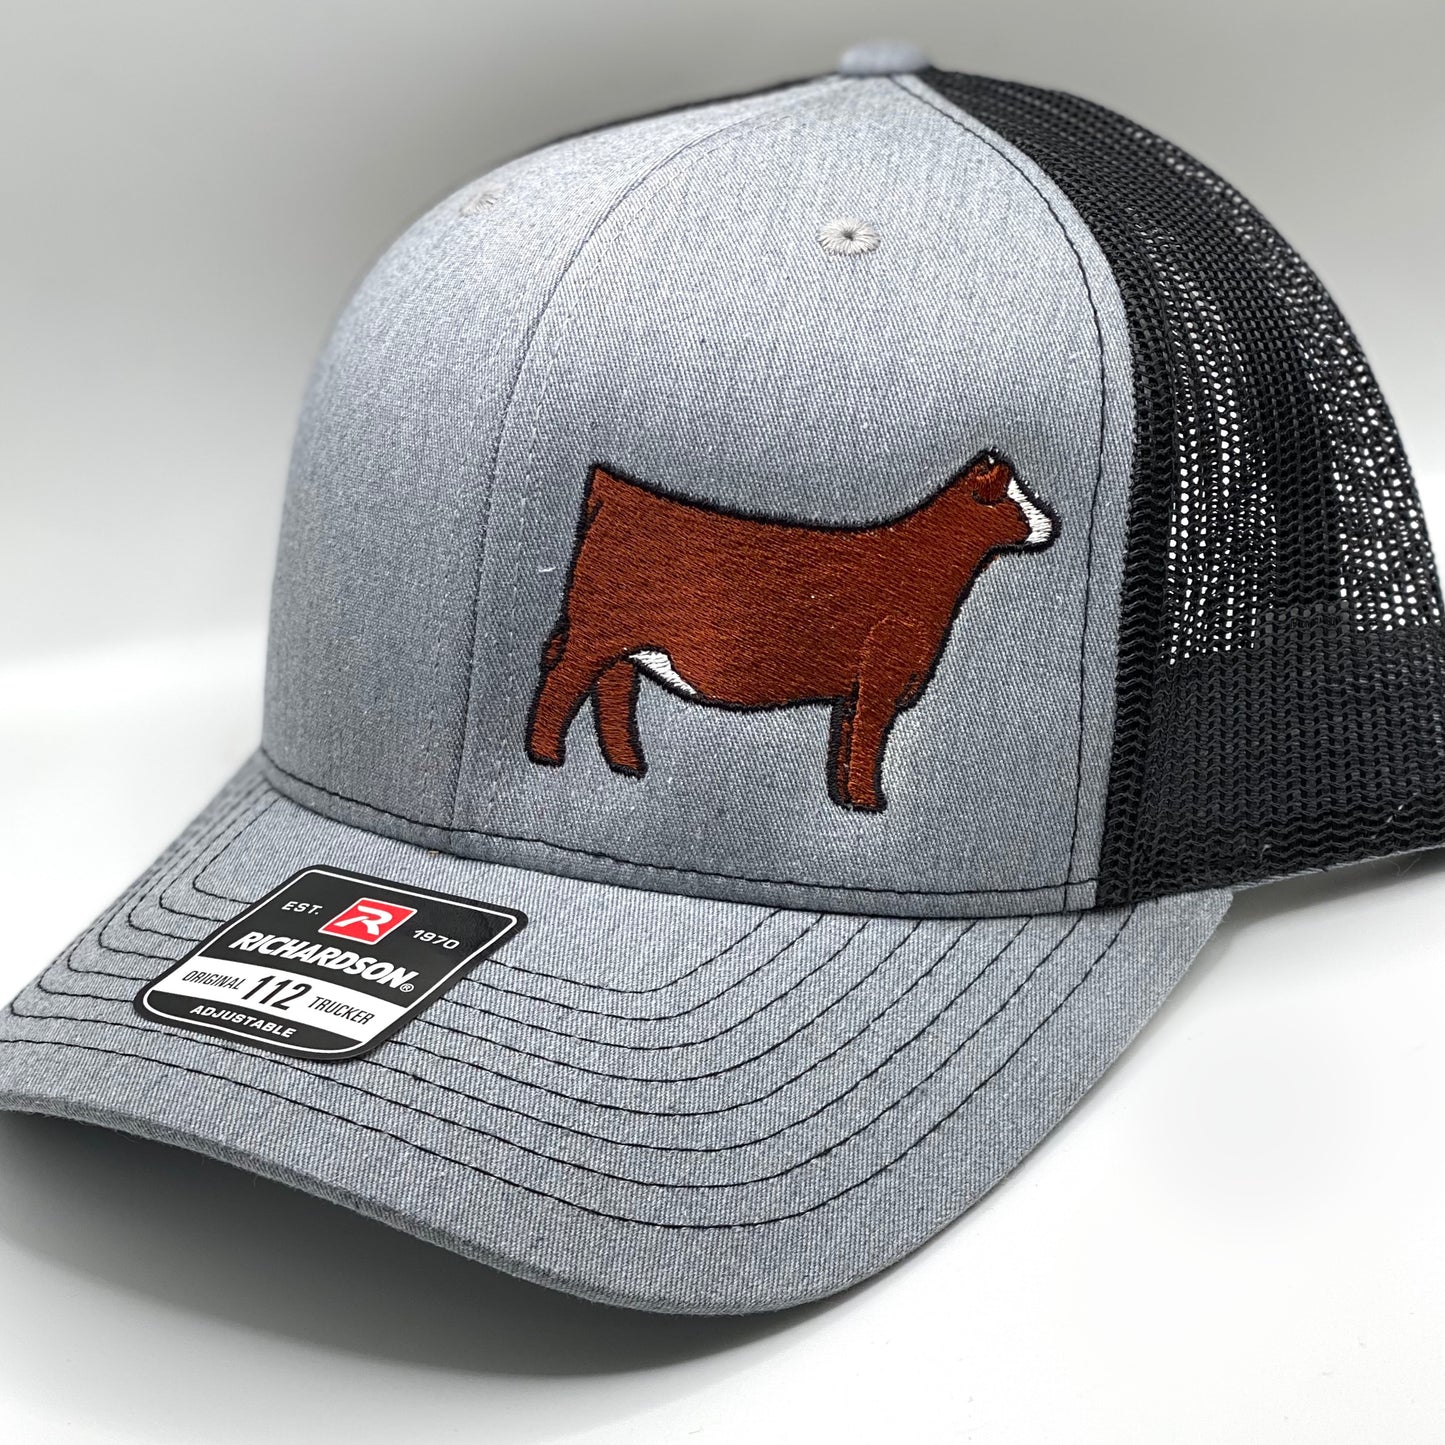 Simmental Cattle Embroidered Hat